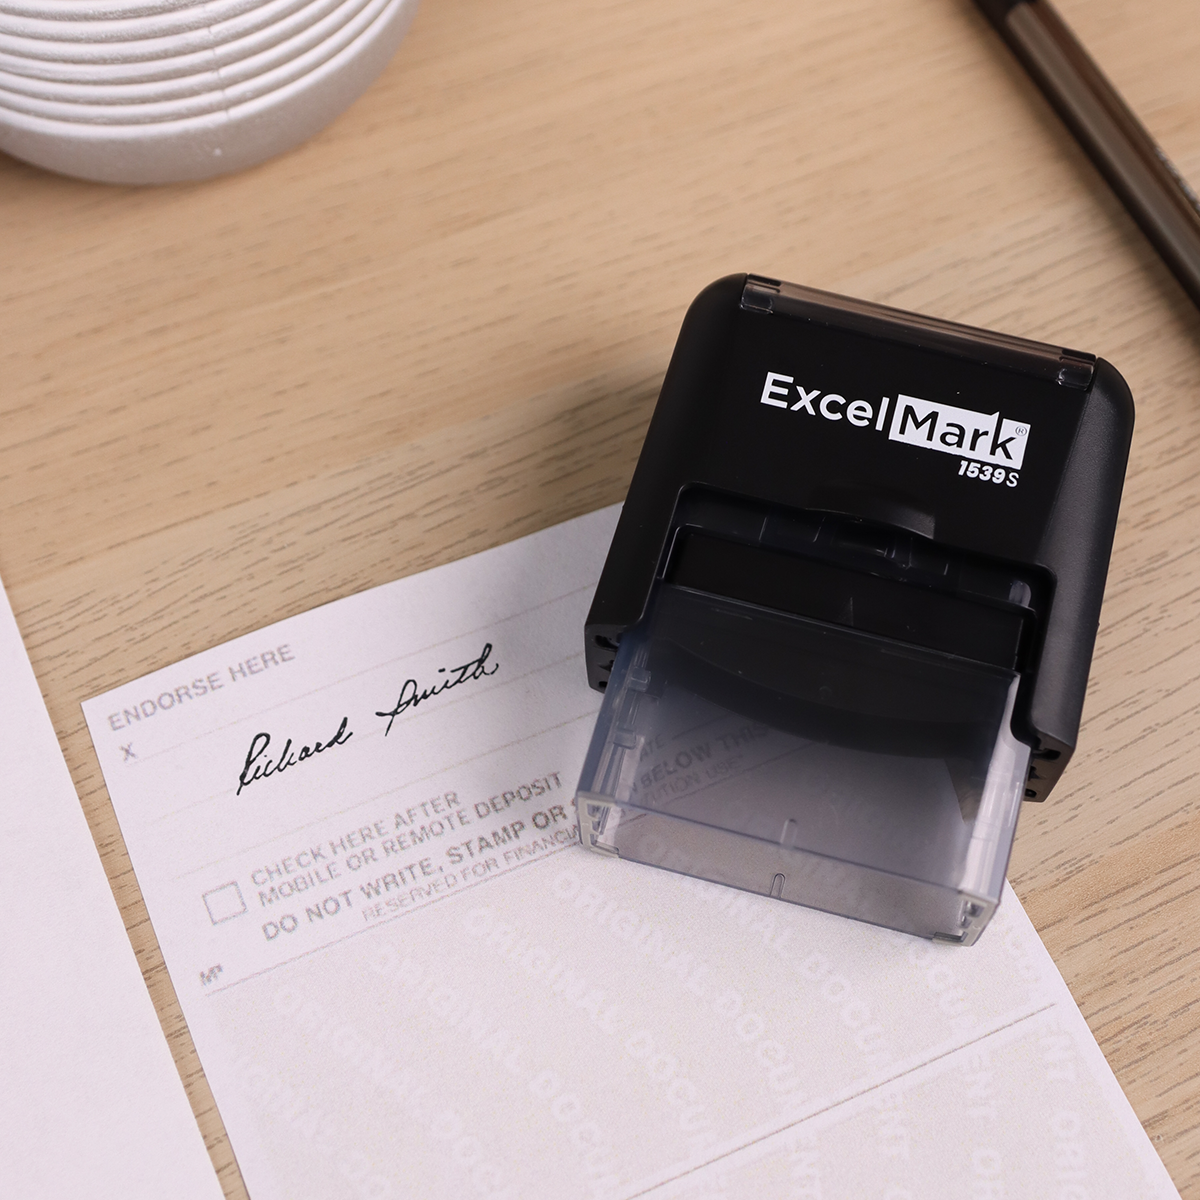 Signature Stamps Self Inking Personalized,38x14mm Custom Signature Stamp  for Signing Name for Checks,Business,Office,File,Deposit